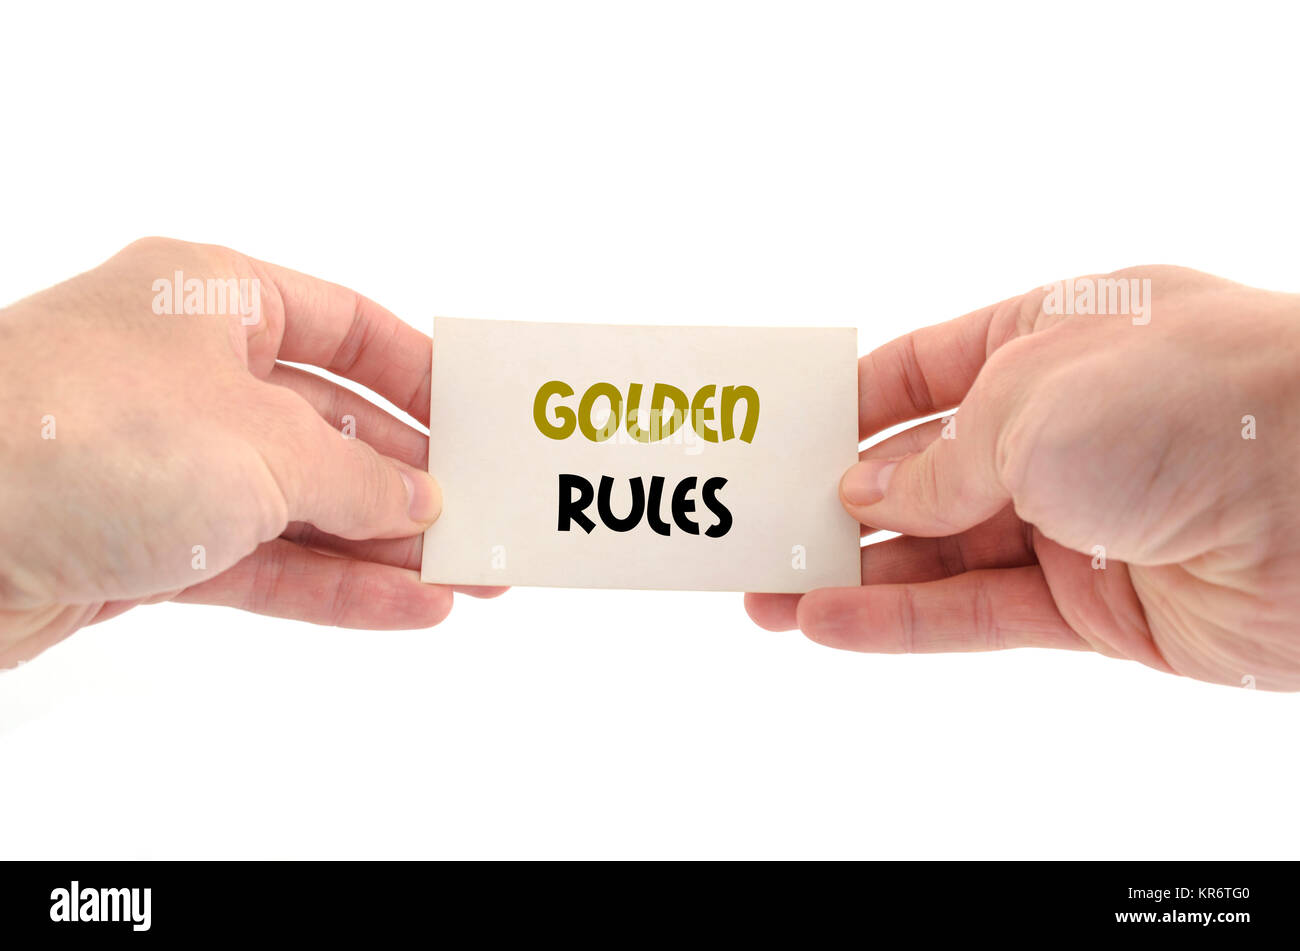 Golden rules text concept Stock Photo